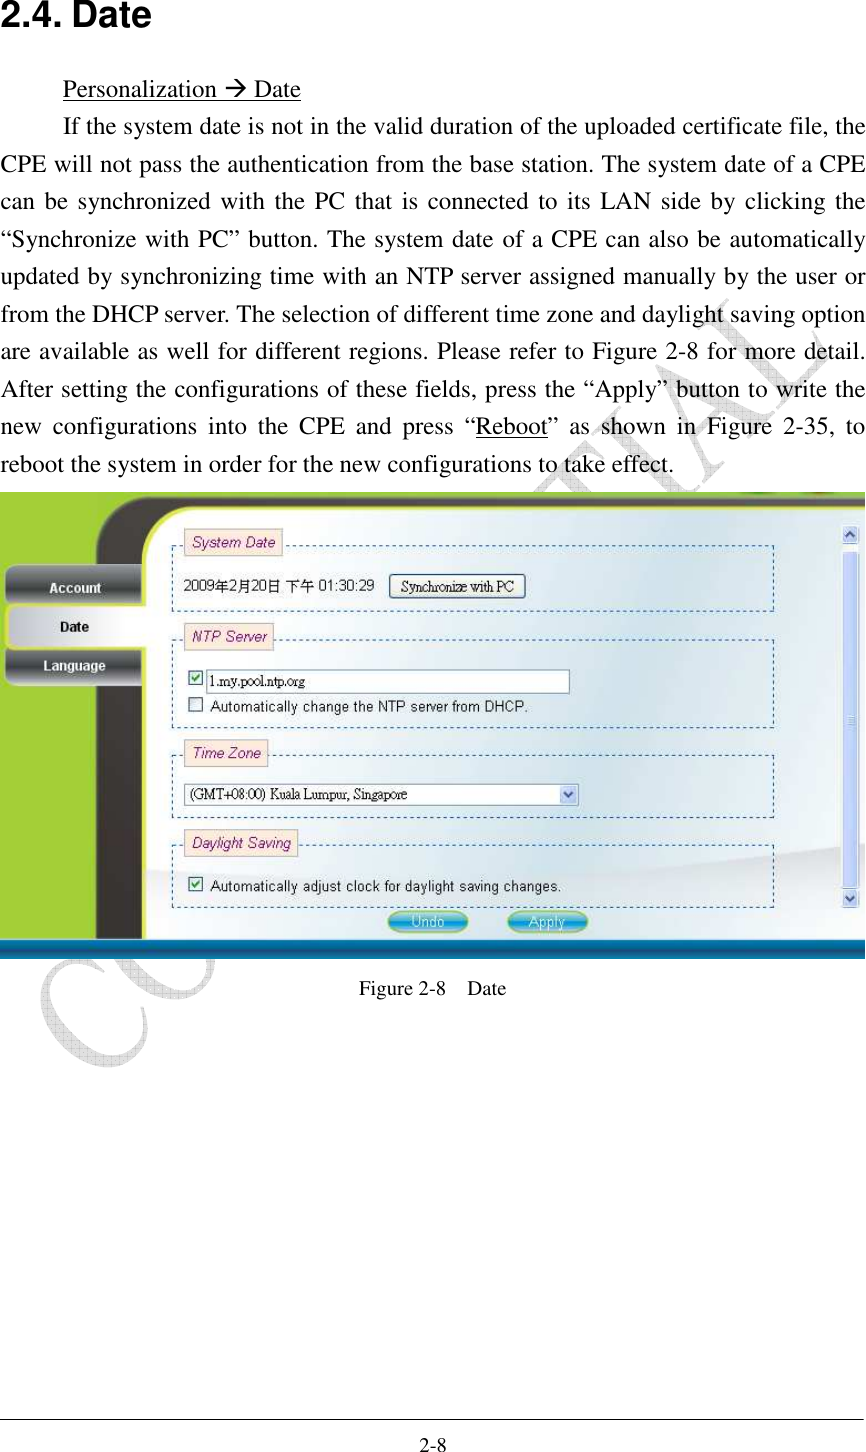    2-8 2.4. Date Personalization  Date If the system date is not in the valid duration of the uploaded certificate file, the CPE will not pass the authentication from the base station. The system date of a CPE can be synchronized with the PC that is connected to its LAN side by clicking the “Synchronize with PC” button. The system date of a CPE can also be automatically updated by synchronizing time with an NTP server assigned manually by the user or from the DHCP server. The selection of different time zone and daylight saving option are available as well for different regions. Please refer to Figure 2-8 for more detail. After setting the configurations of these fields, press the “Apply” button to write the new  configurations  into  the  CPE  and  press  “Reboot”  as  shown  in  Figure  2-35,  to reboot the system in order for the new configurations to take effect.  Figure 2-8    Date  